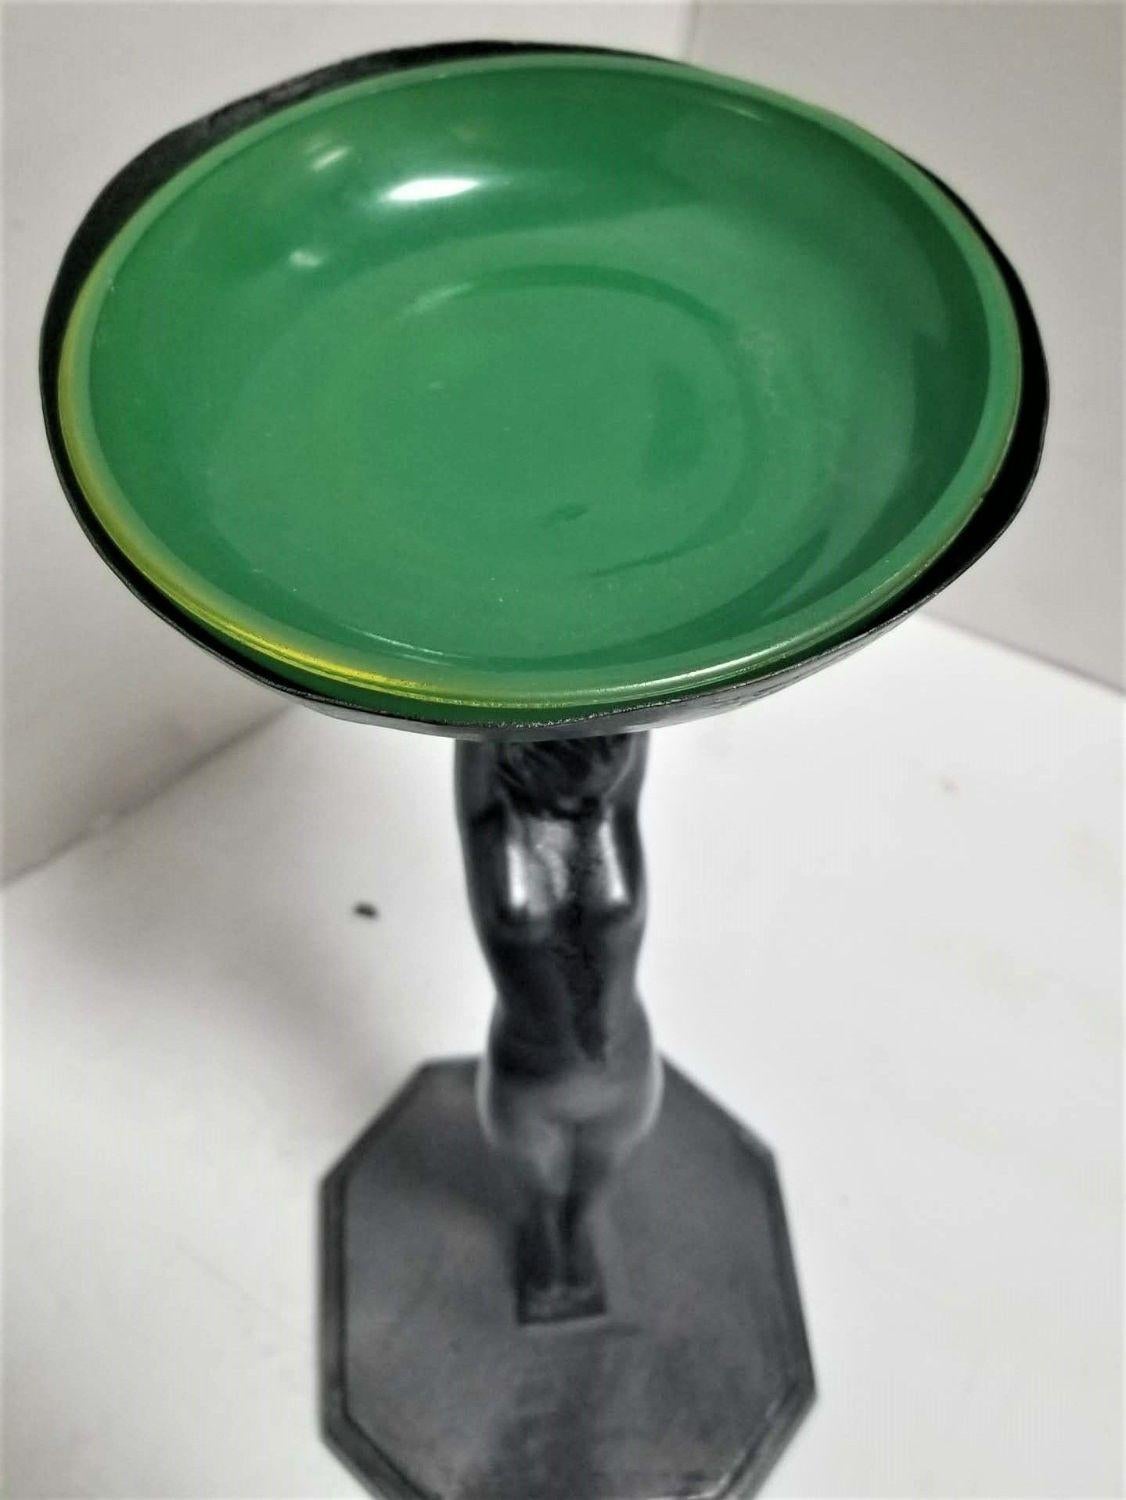 1920s Art Deco Frankart nude female figurine holding ashtray with green glass bowl.

This is Sculpture is #210 according to the original Frankart catalog in the line designed by Arthur von Frankenberg.

Can also be used as a jewelry holder or